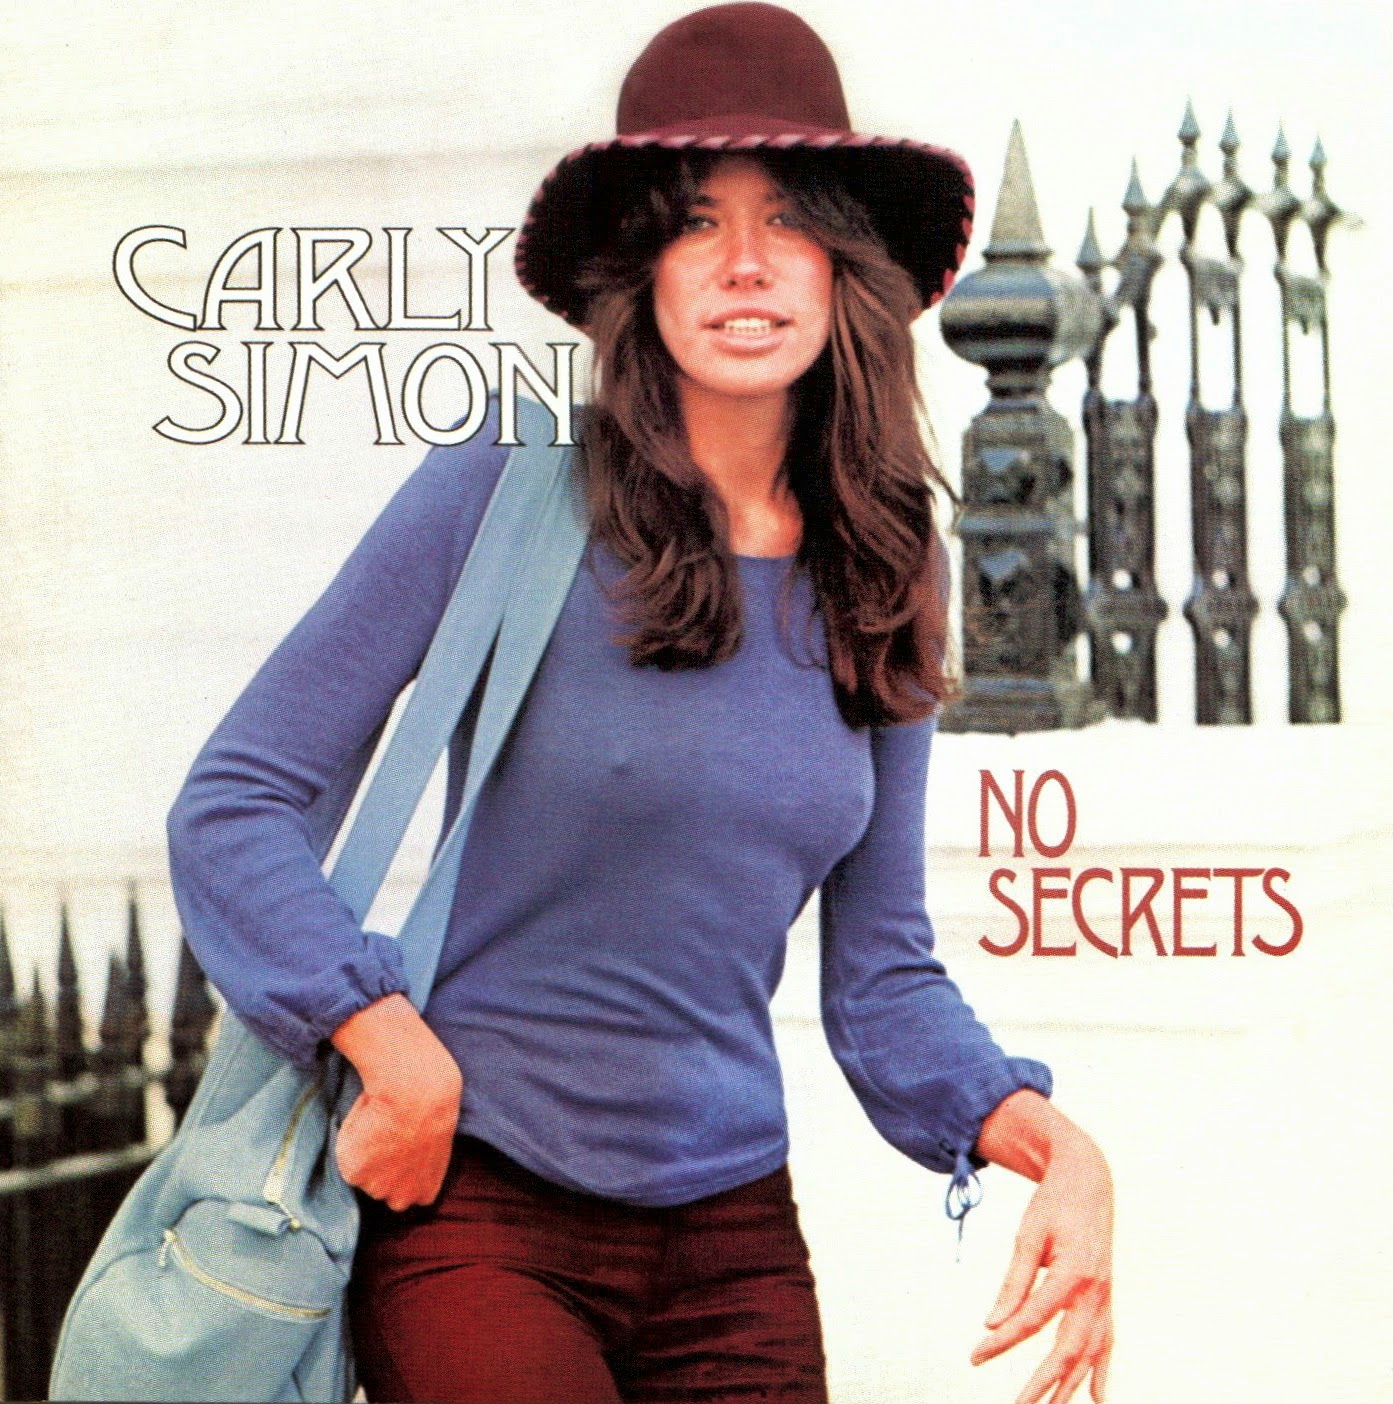 Oh, btw, here is Carly Simon from 1972. 